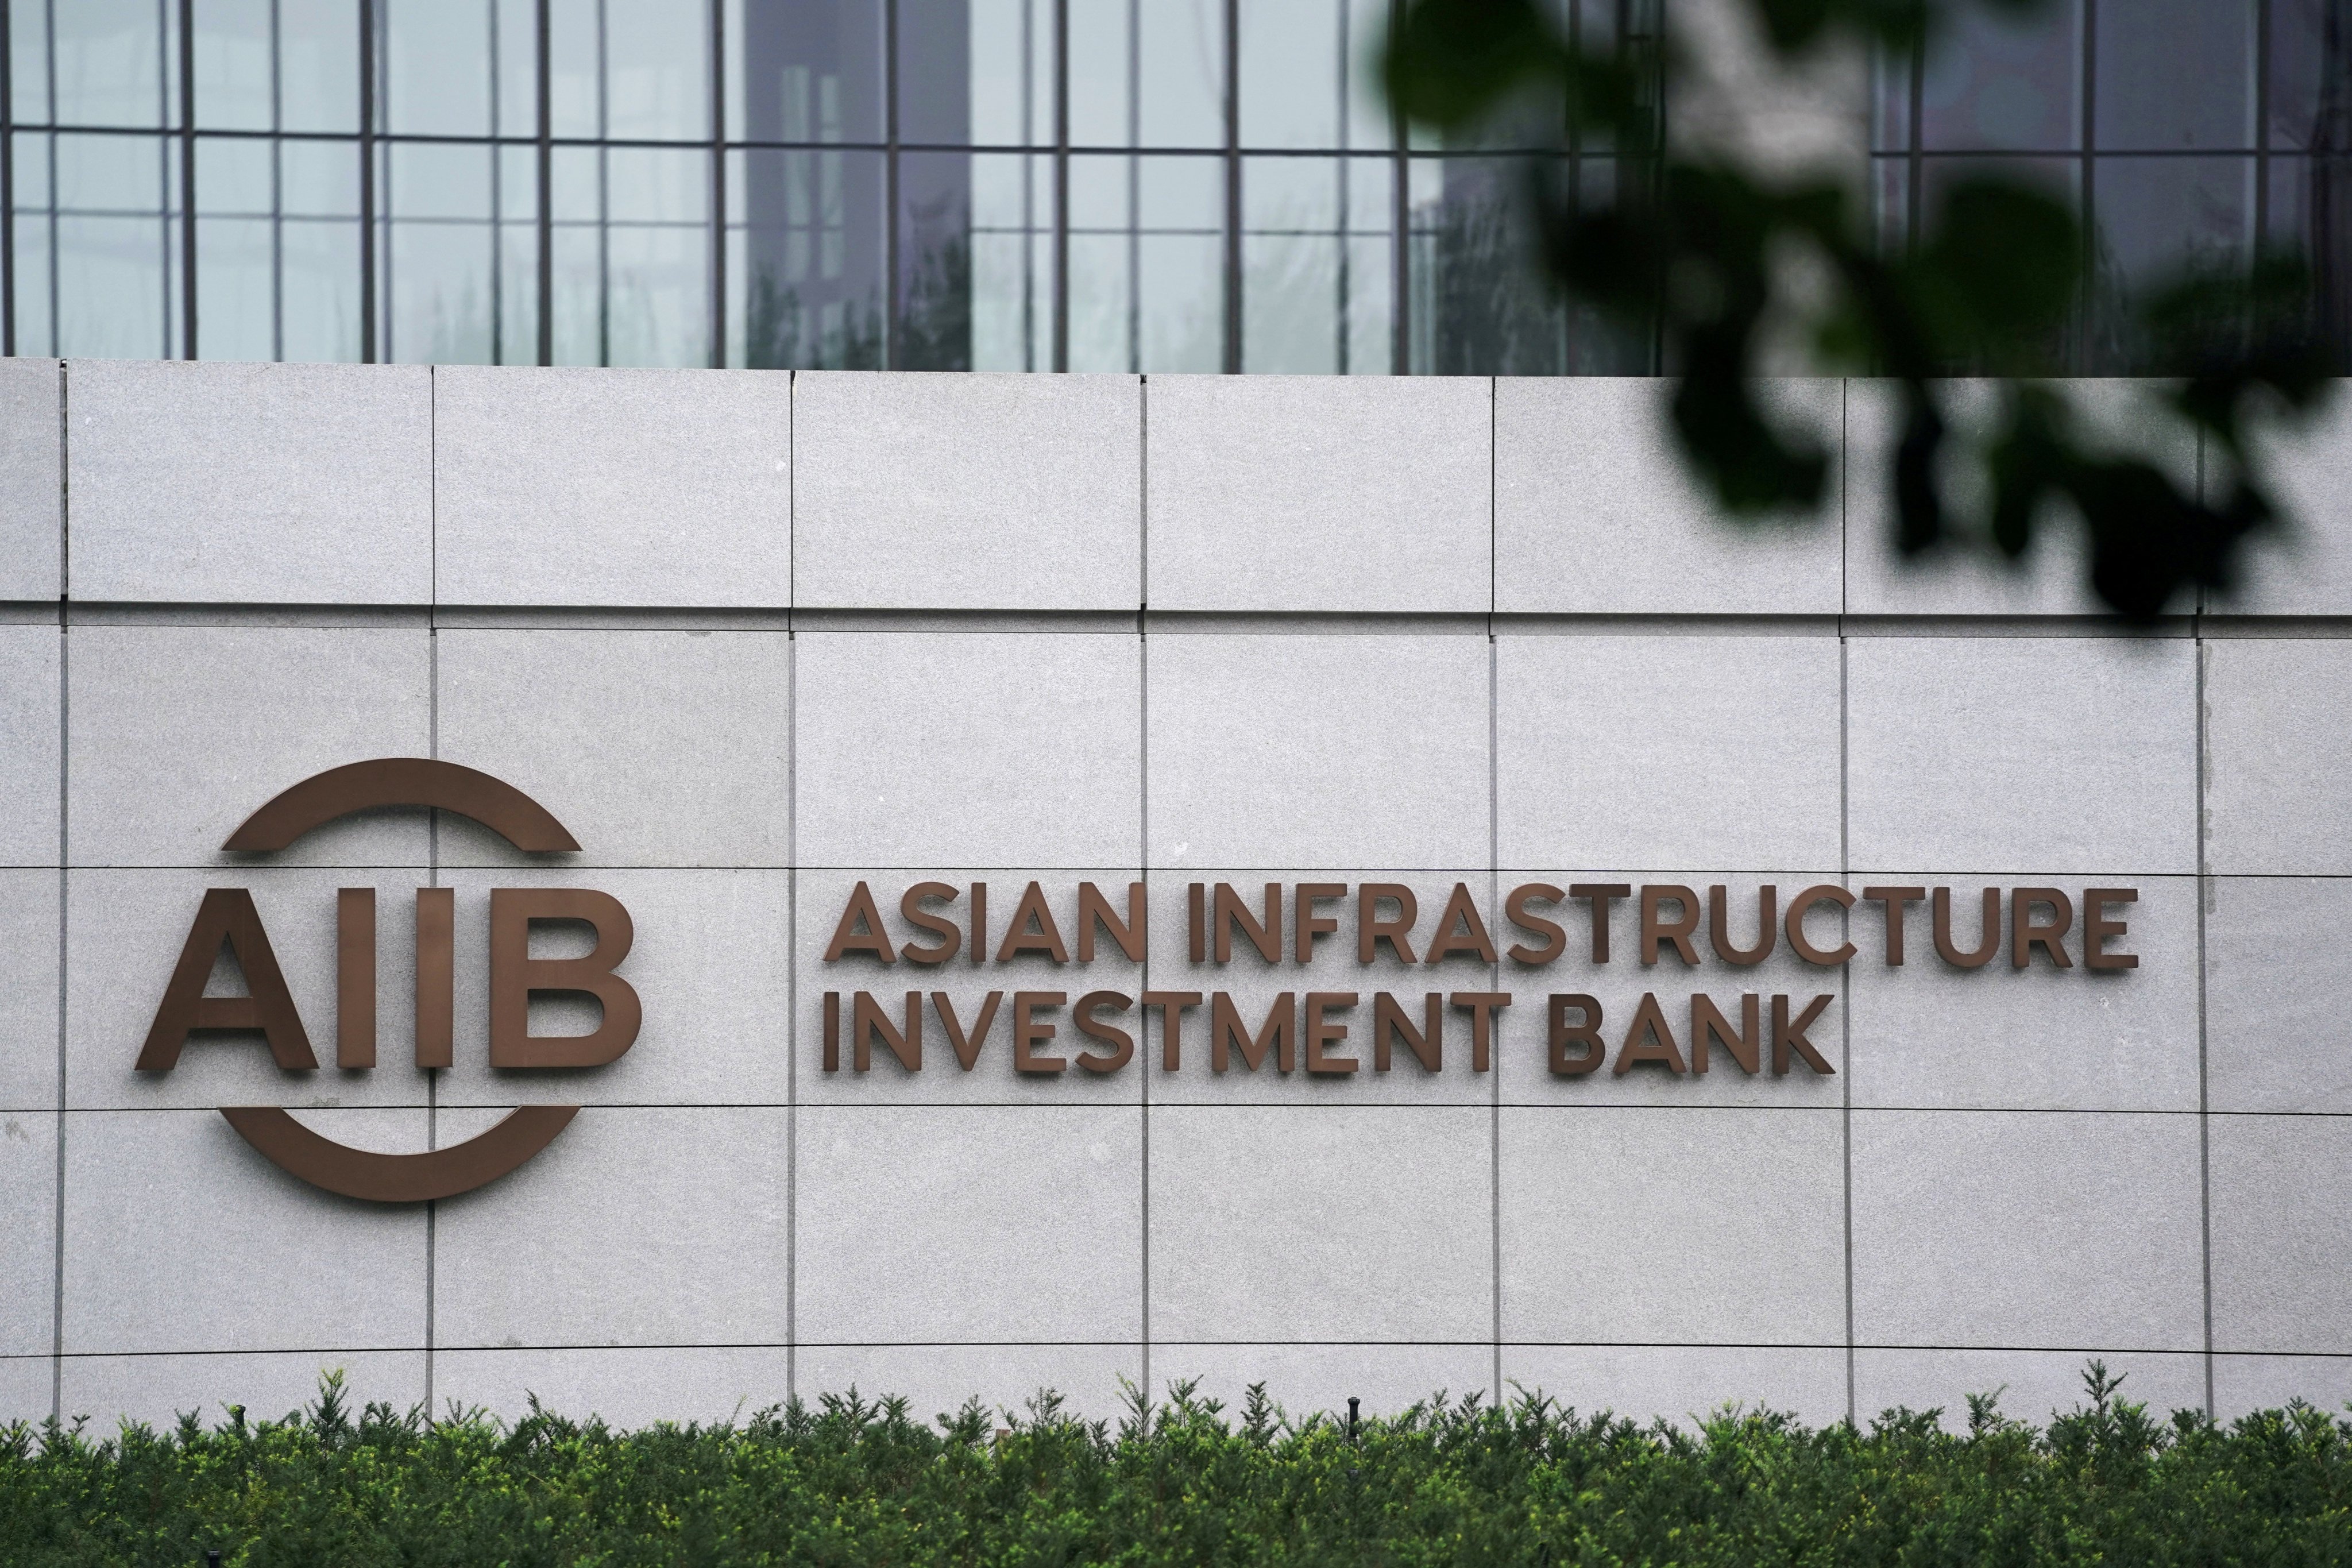 The Beijing headquarters of global development lender Asian Infrastructure Investment Bank. Photo: Reuters